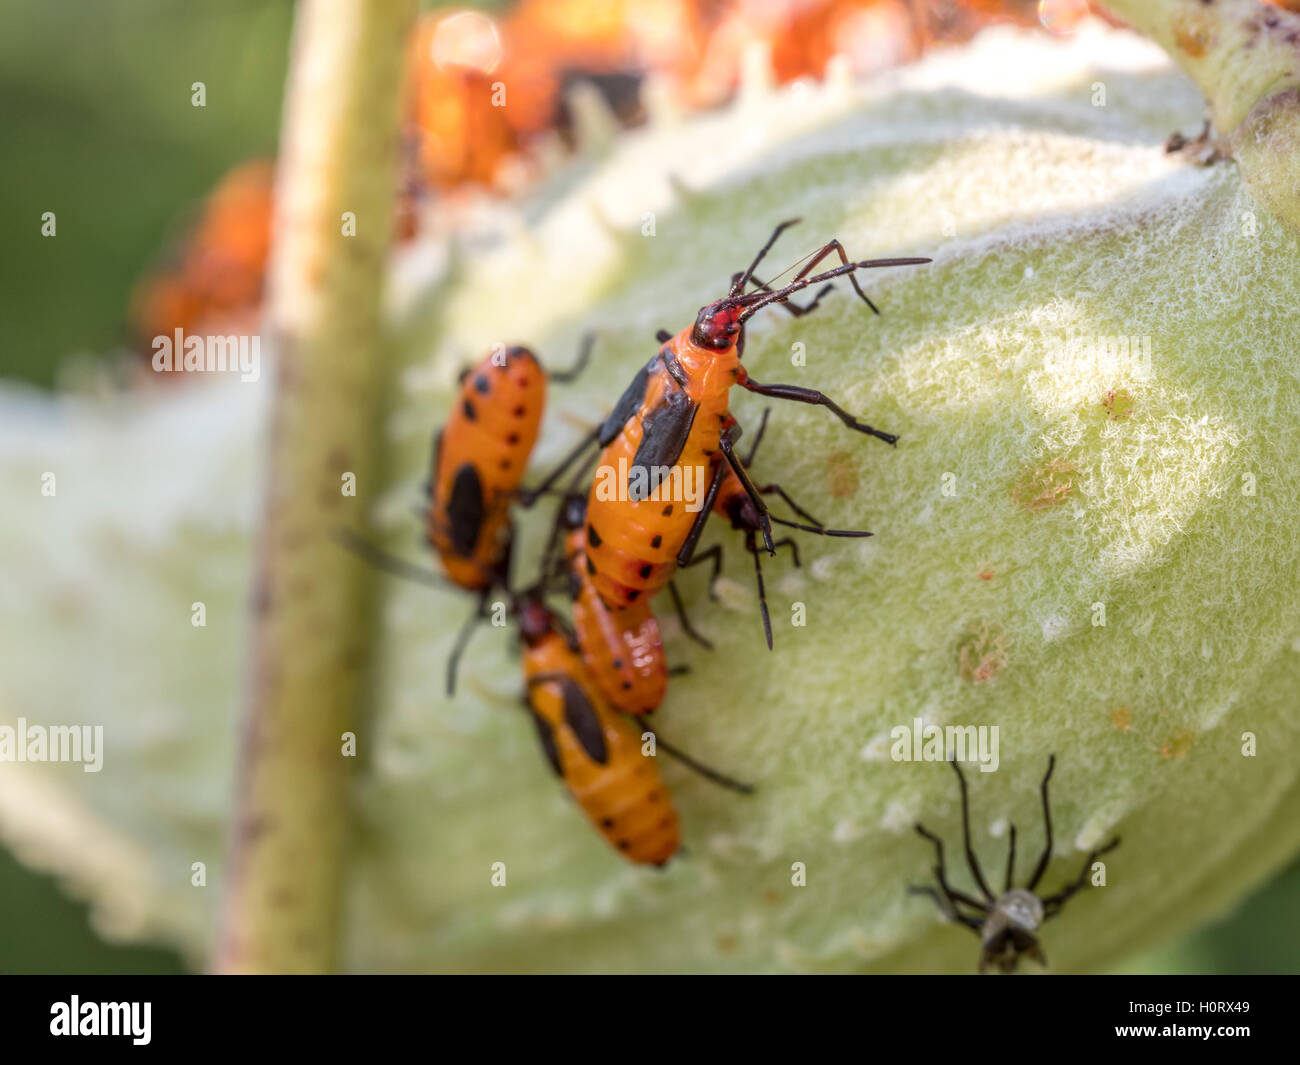 Lygaeidae are a family in the Hemiptera  commonly known as milkweed bugs, Stock Photo